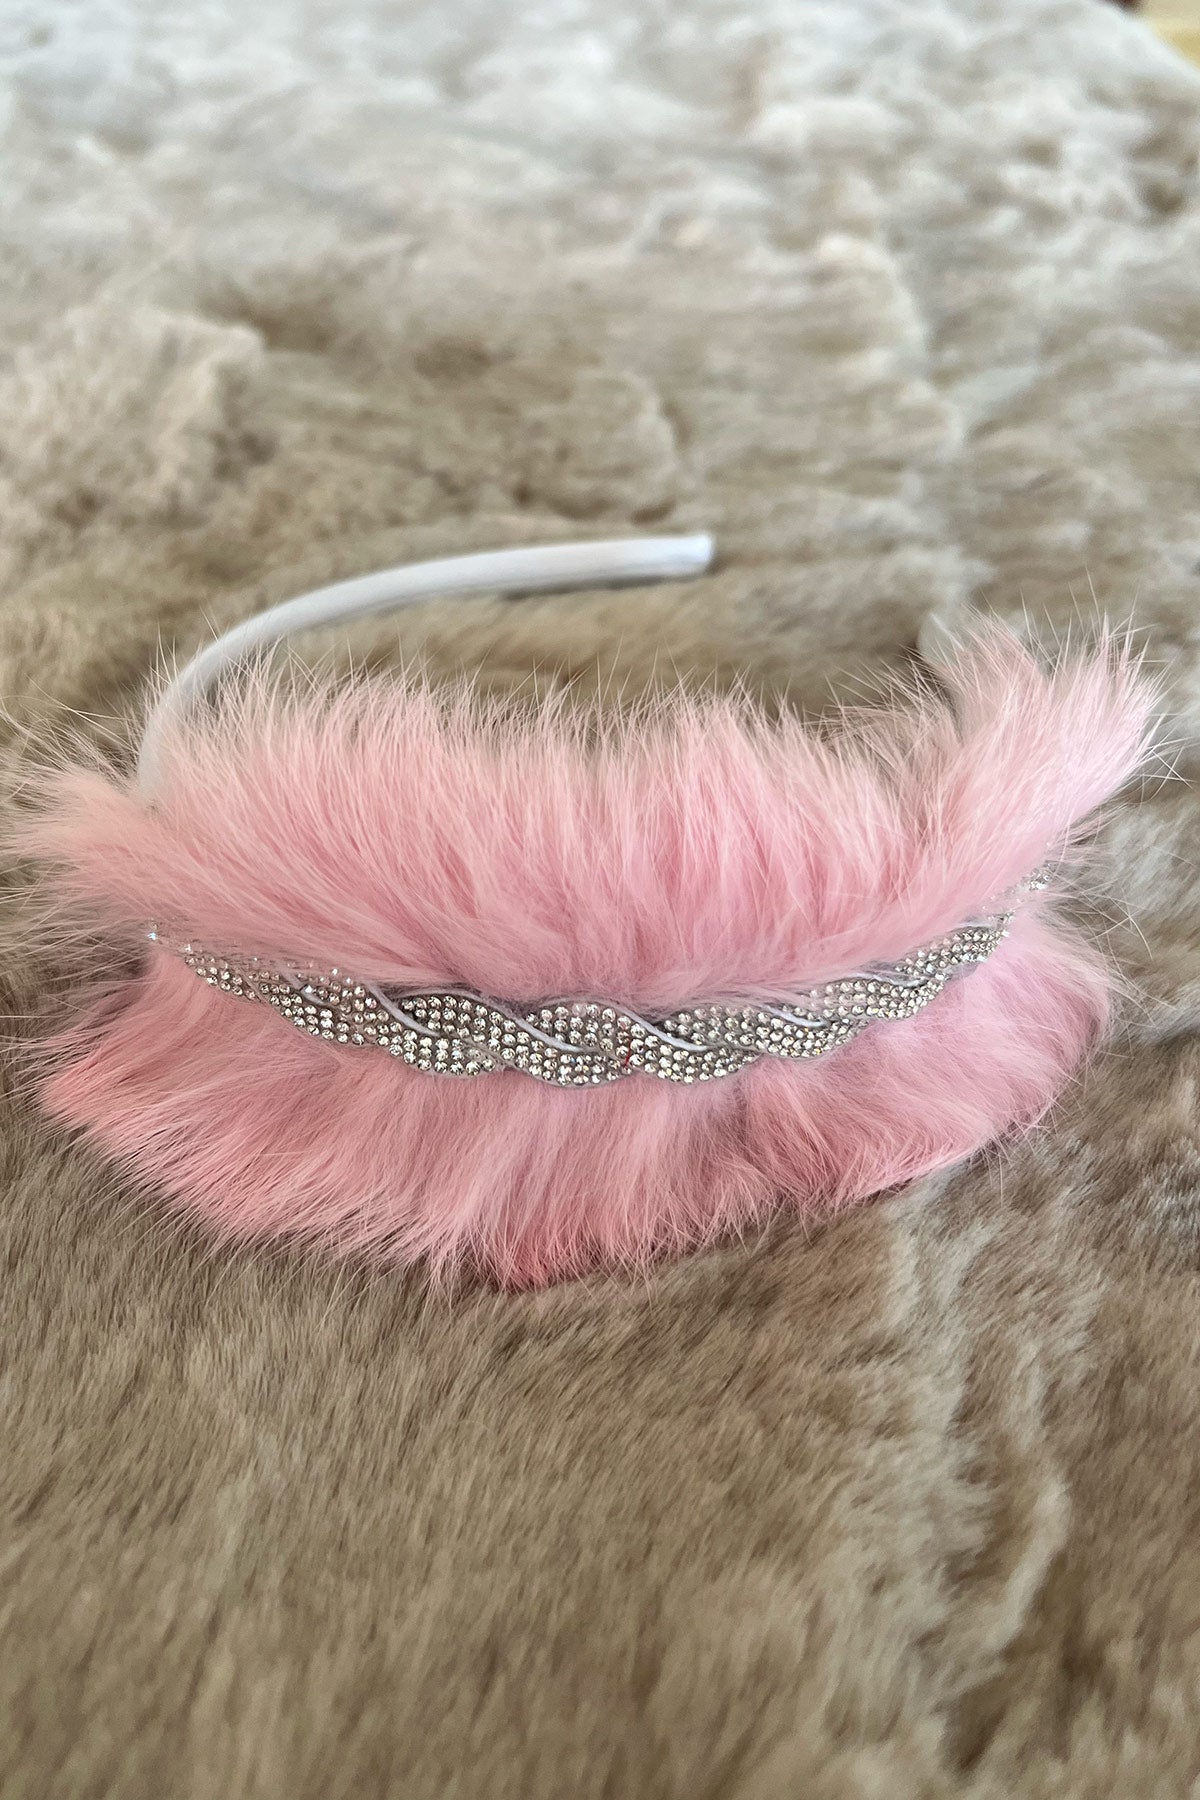 Shopymommy 71008 Feather Themed Maternity Crown Pink